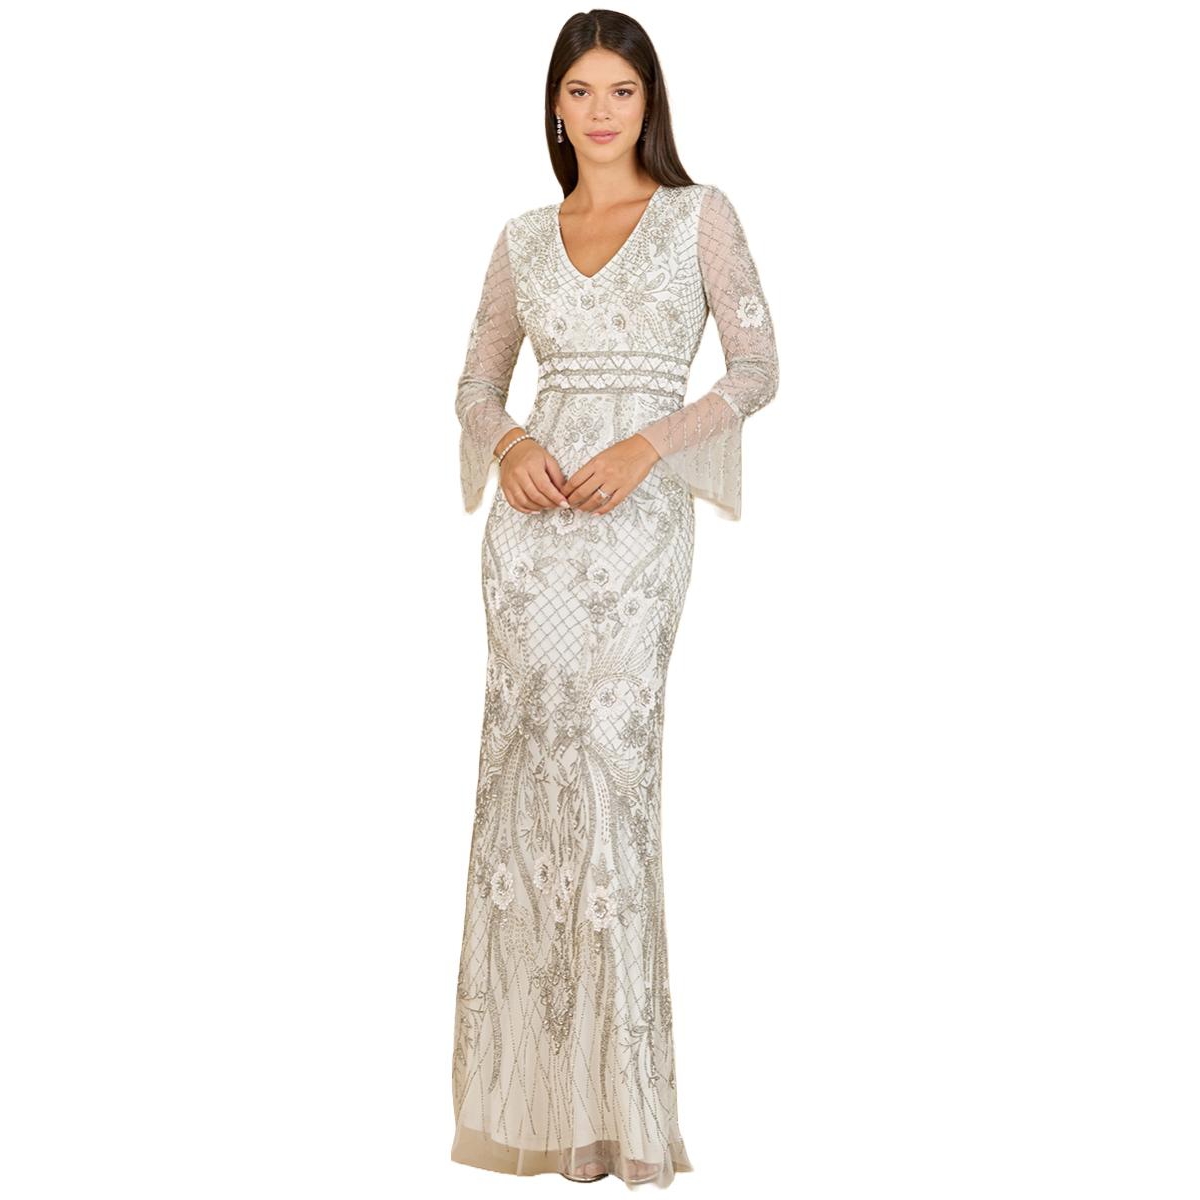 Women's Long Sleeve Ethereal Bridal Gown - Ivory